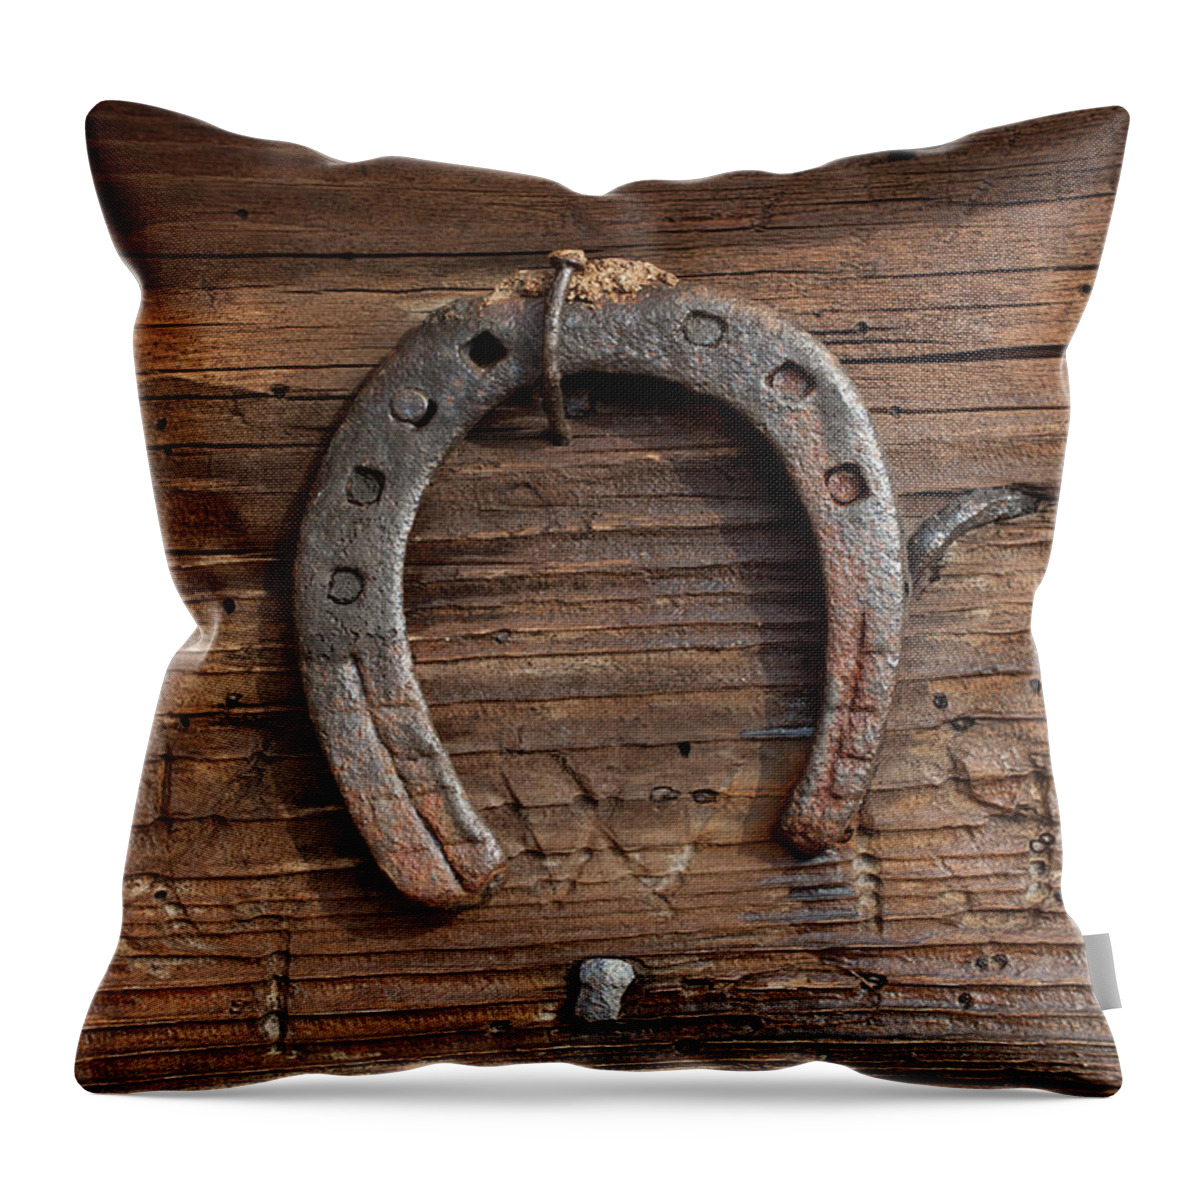 Horse Throw Pillow featuring the photograph Horseshoe by Malerapaso